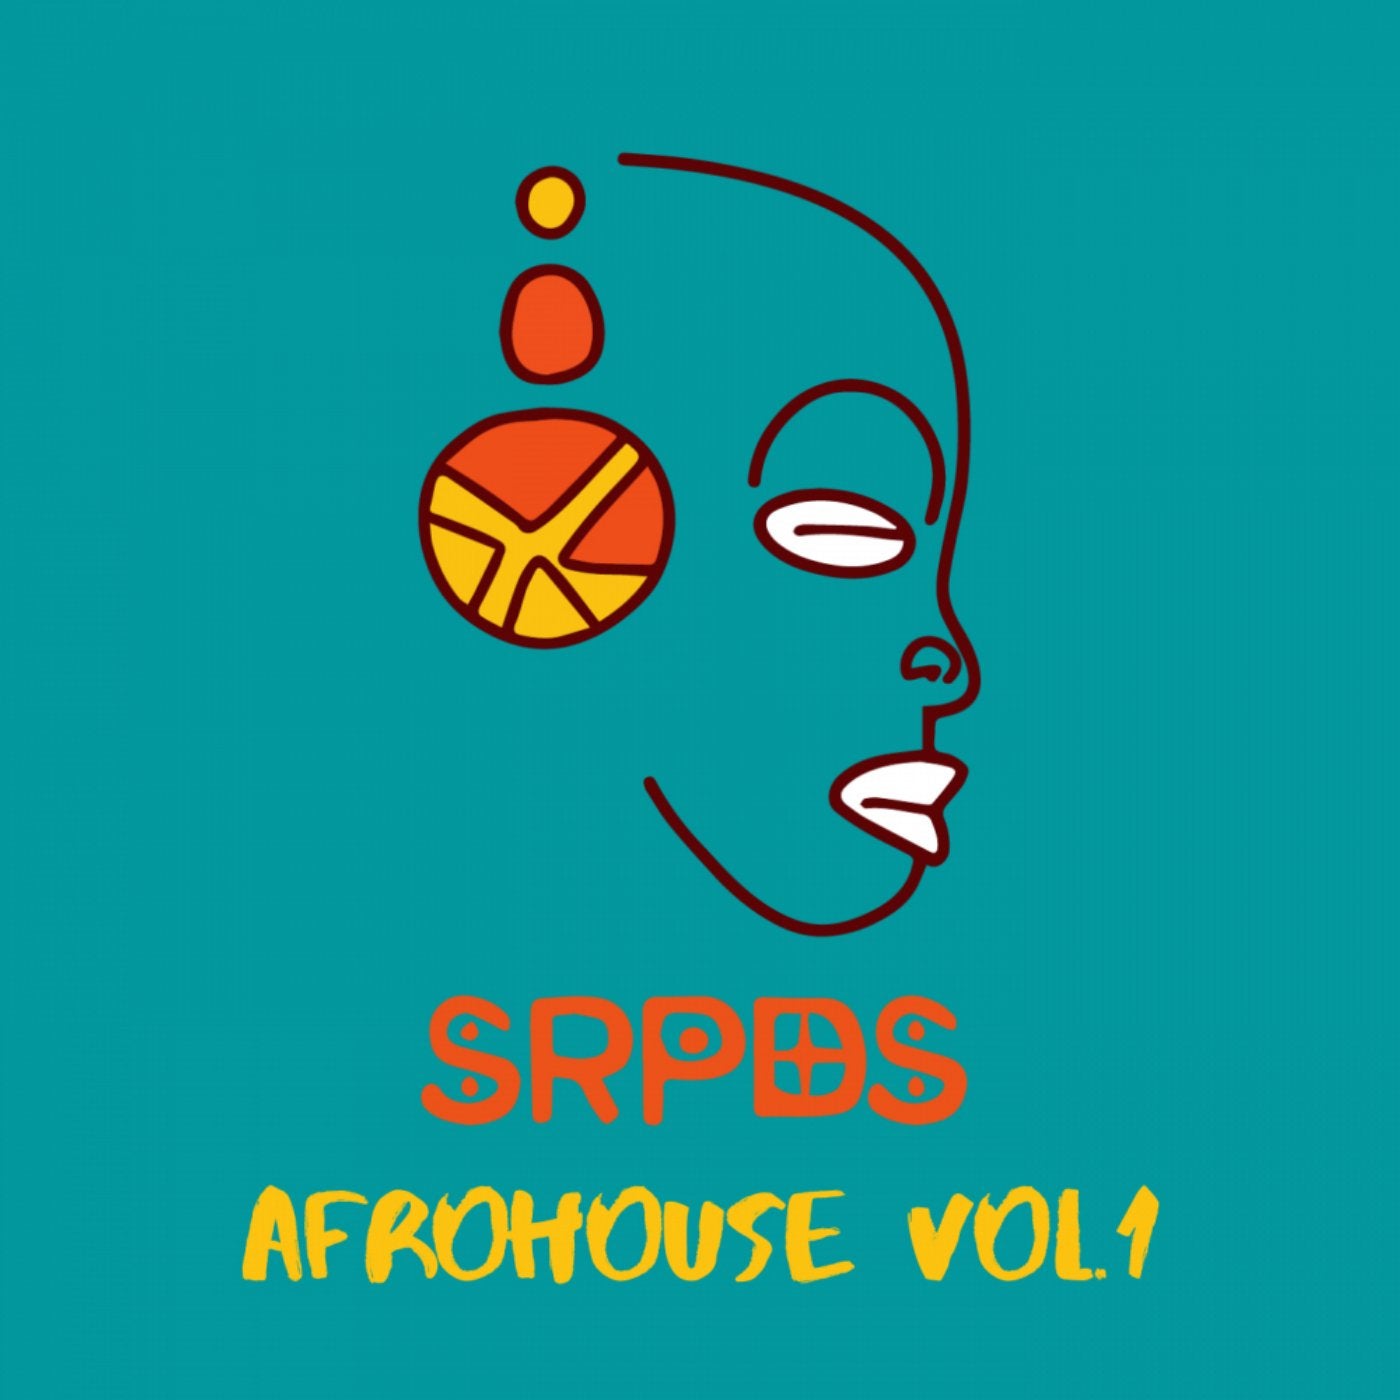 AFRO HOUSE Vol.1